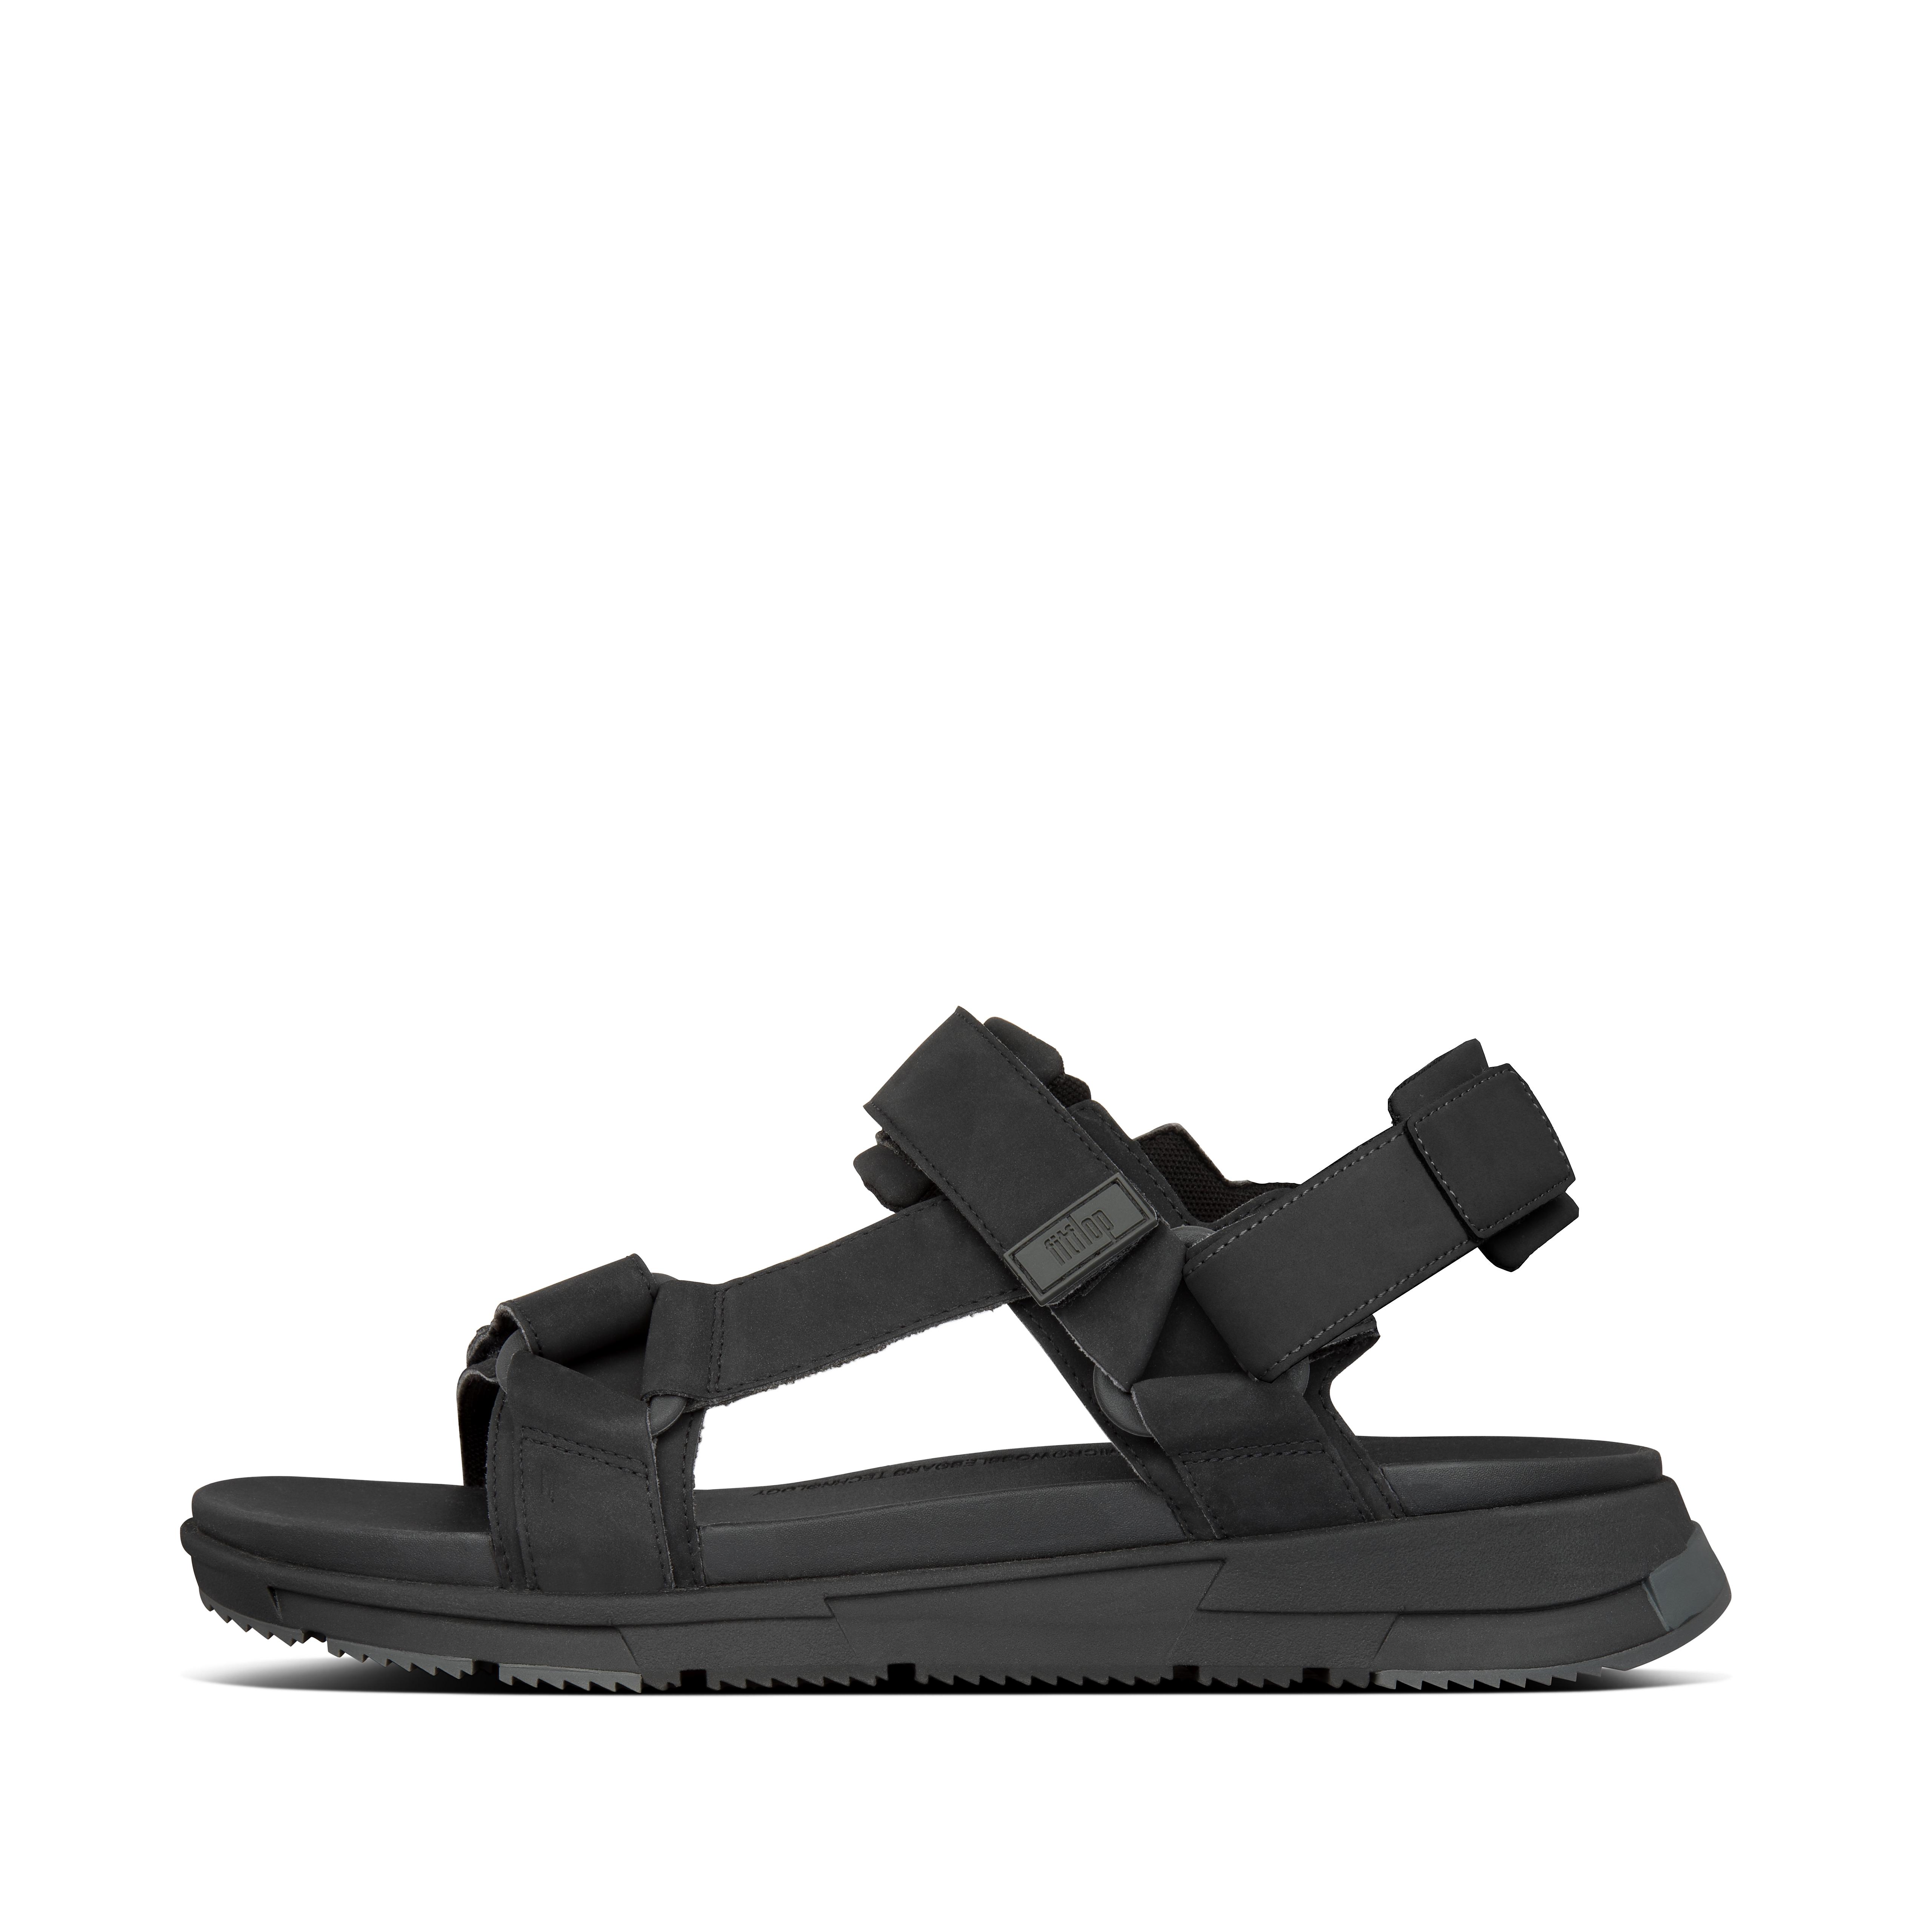 mens rubber sandals with backstrap